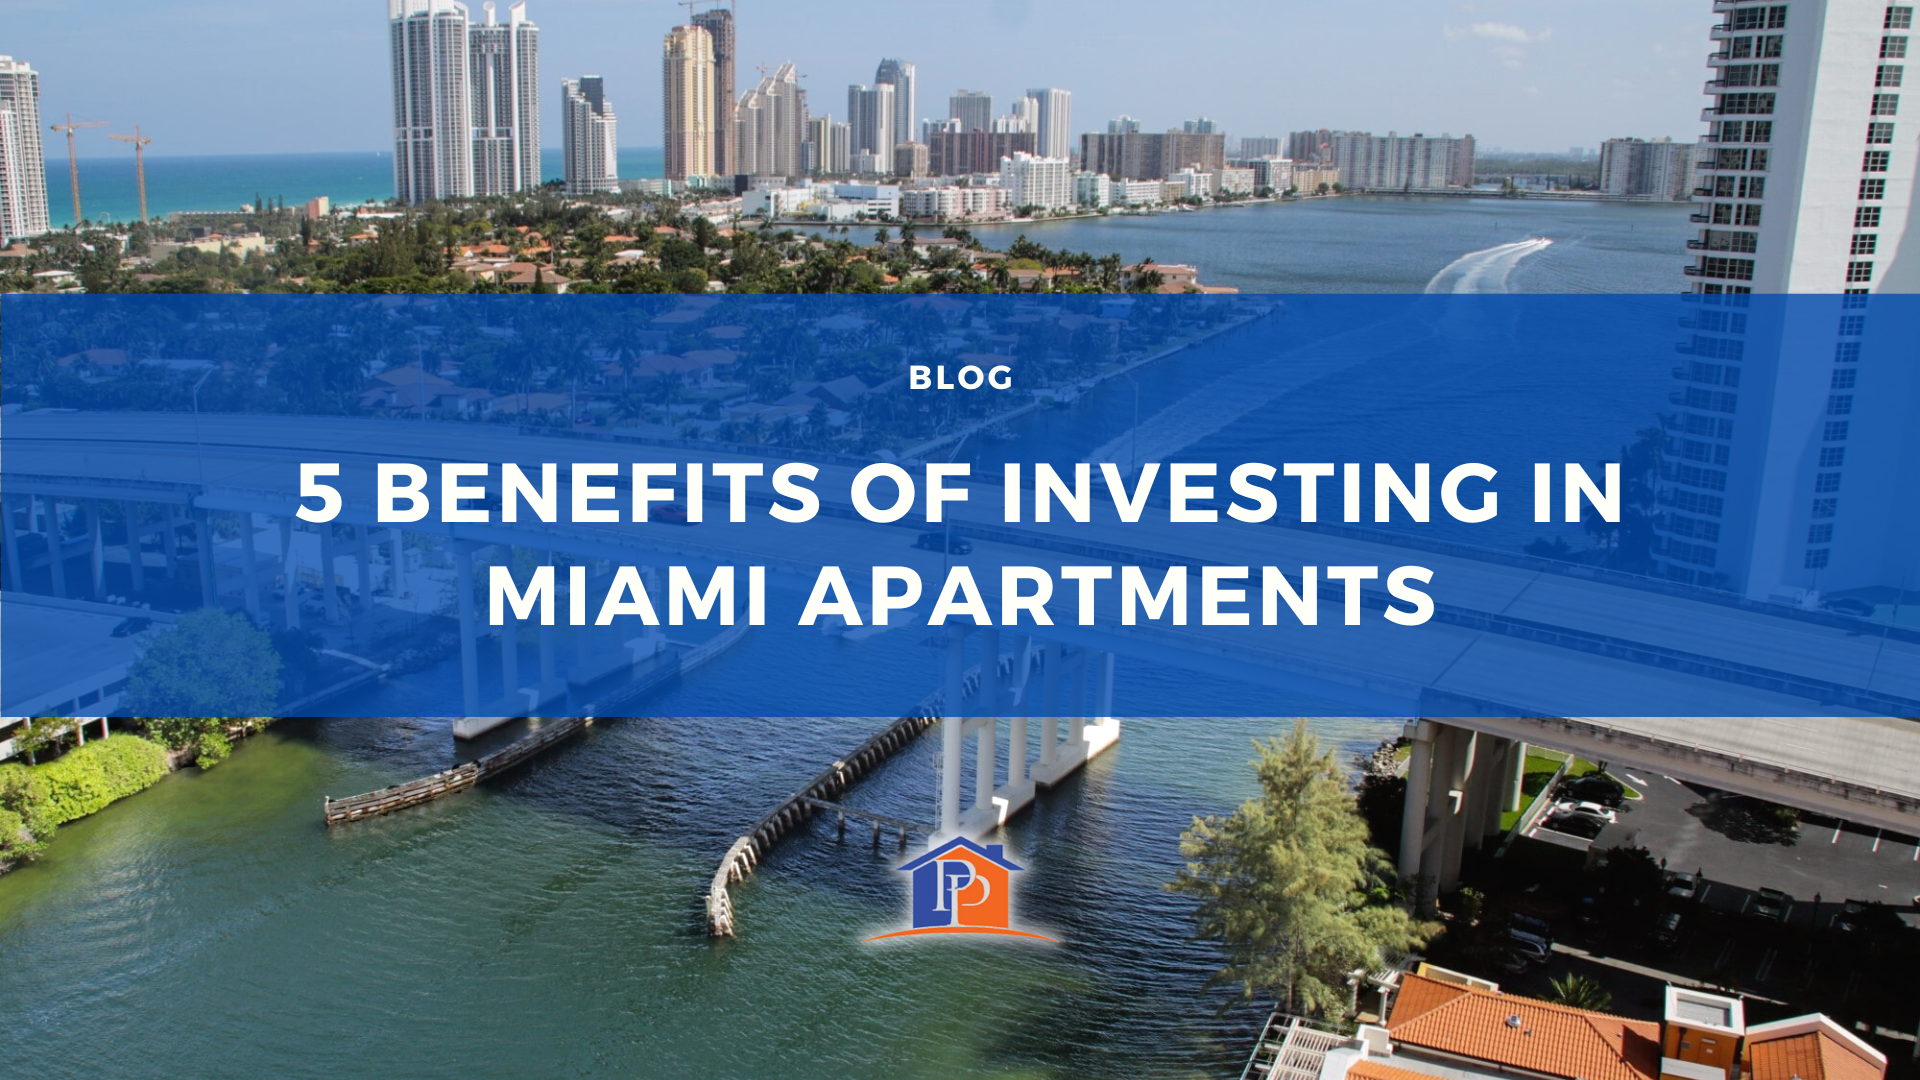 5 Benefits of Investing in Miami Apartments